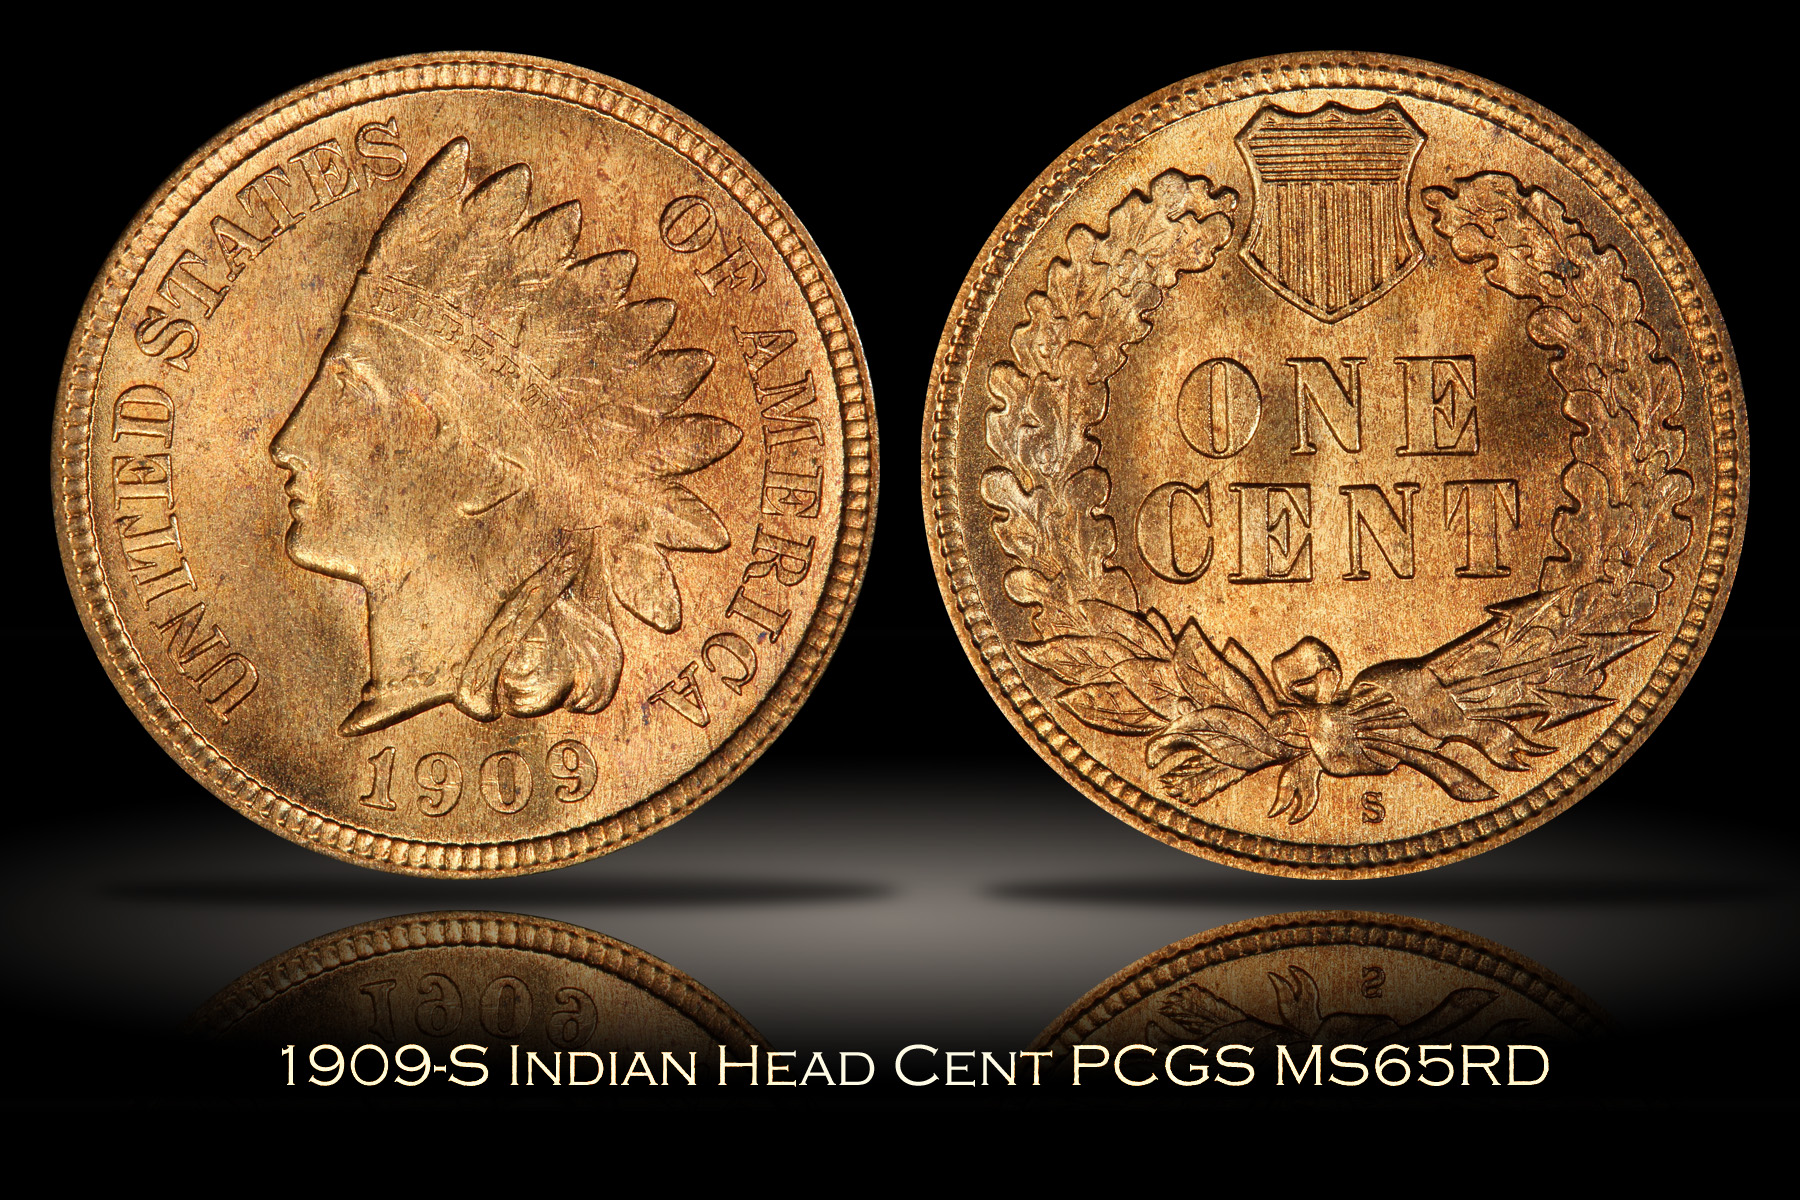 1909-S Indian Head Cent PCGS MS65RD